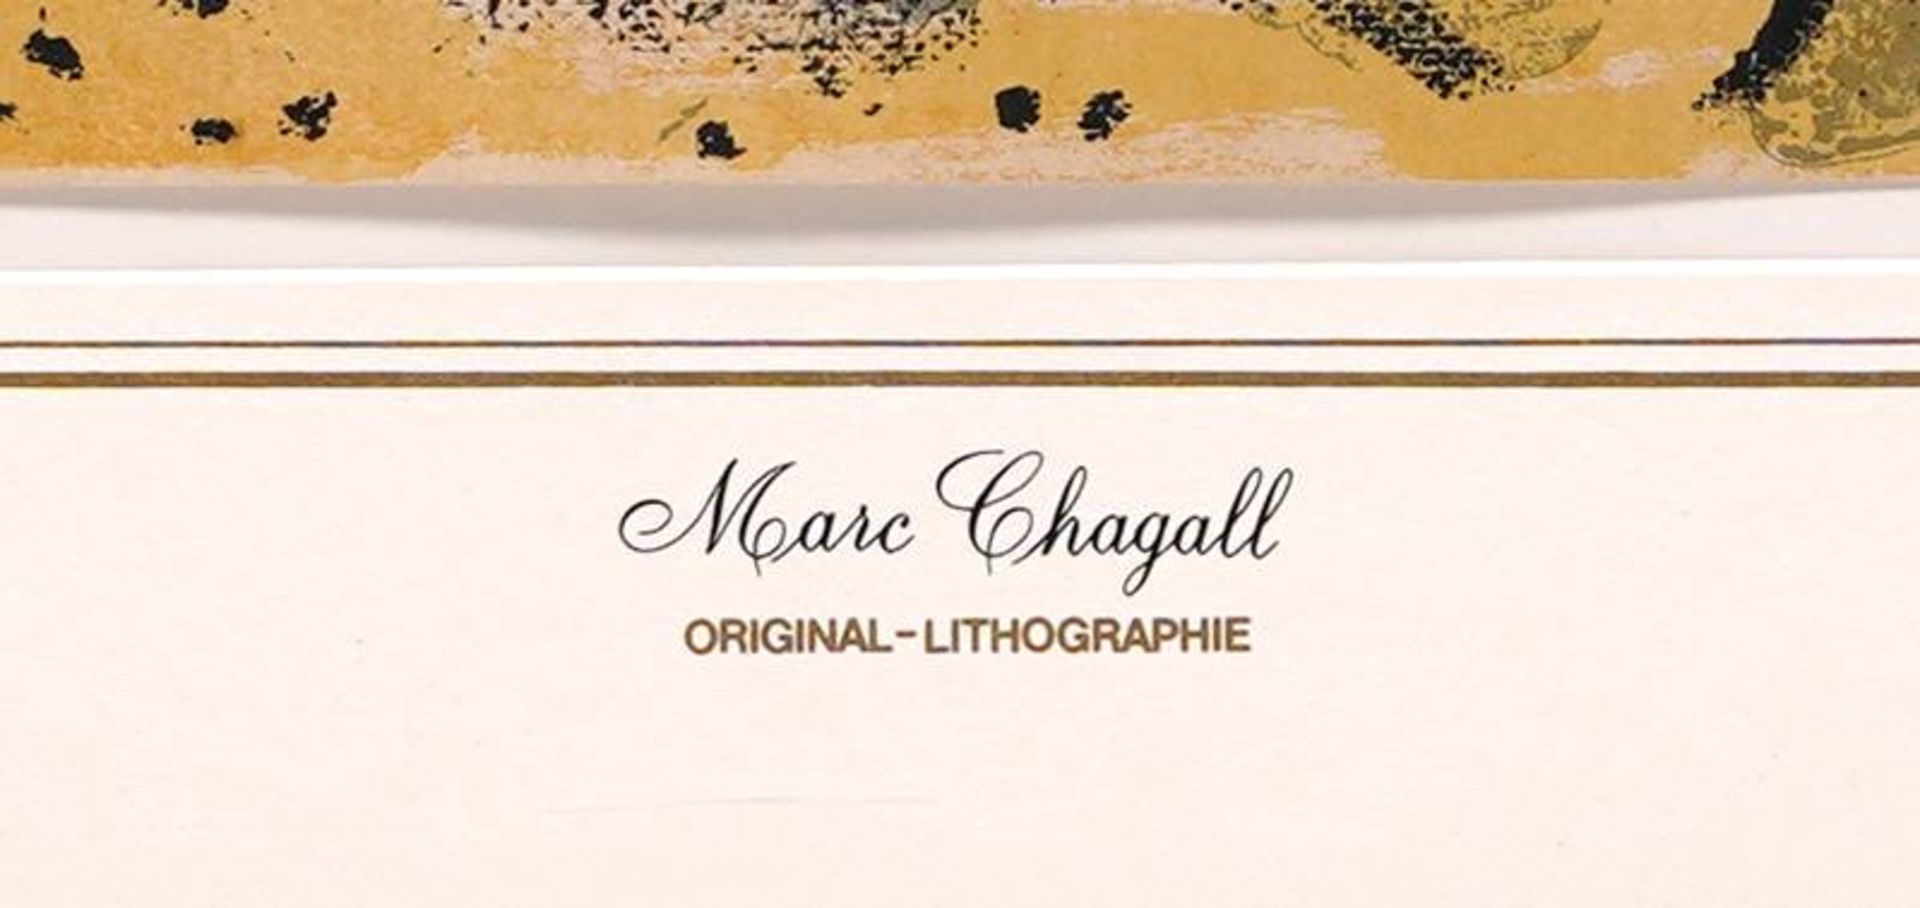 Chagall, Marc after - Image 3 of 4